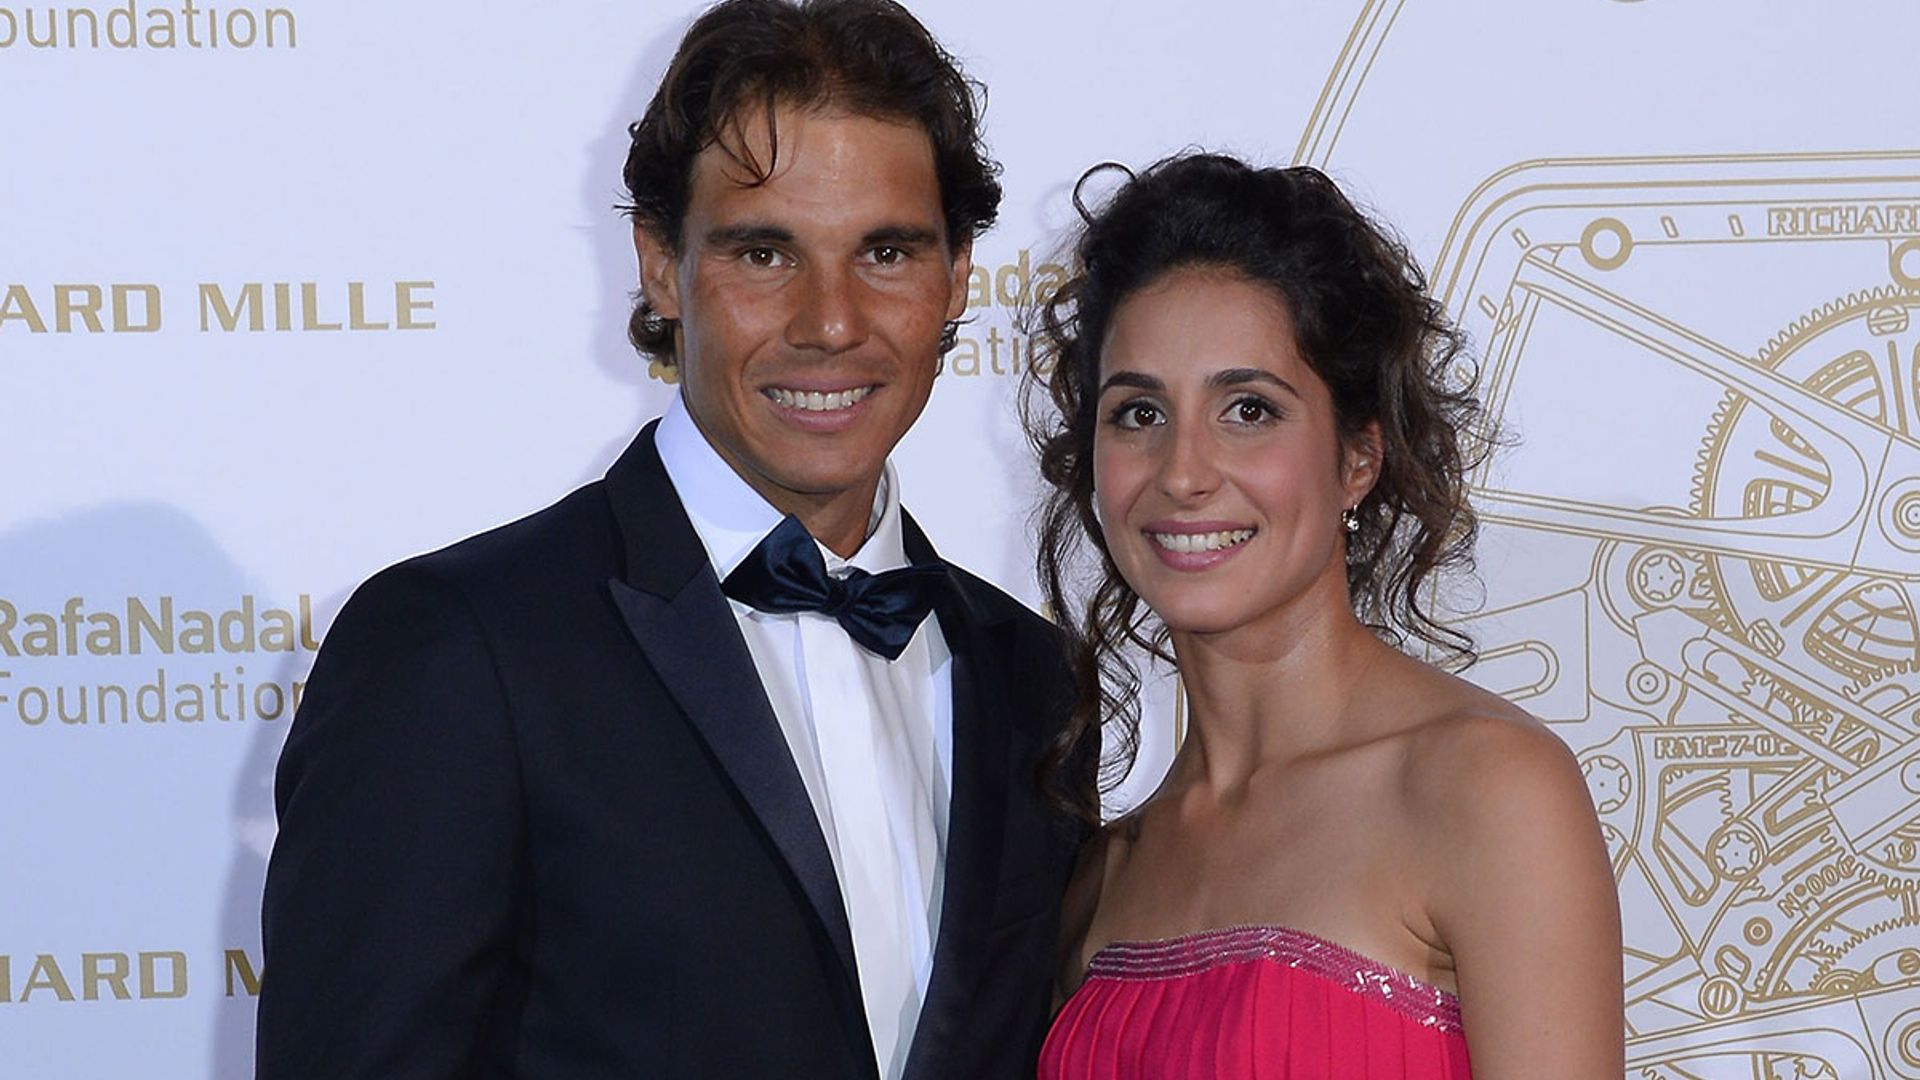 Image result for rafael nadal and xisca perella